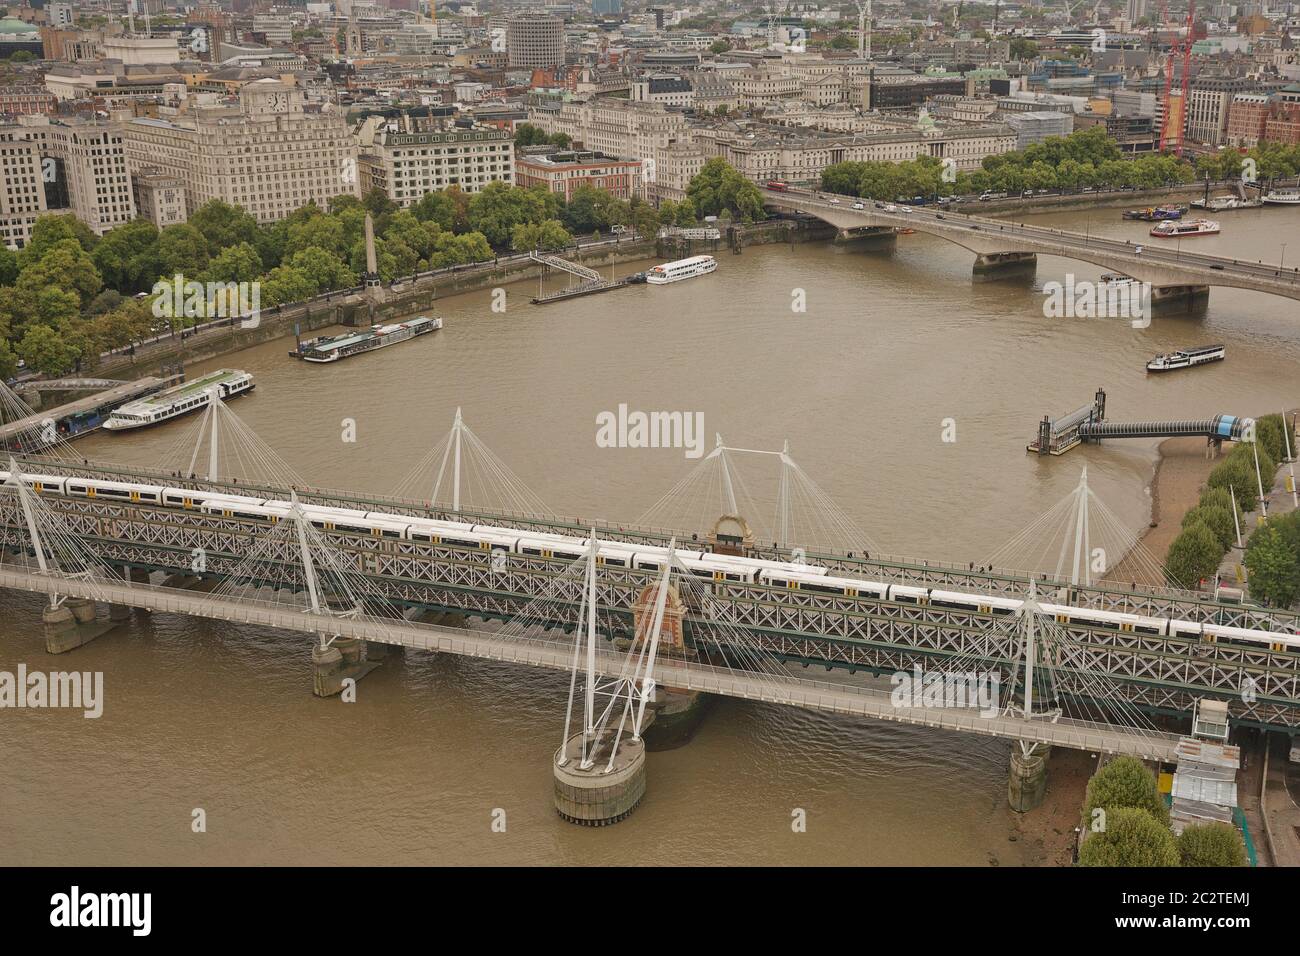 The view of the city from the London Eye ferris wheel on the South Bank of River Thames Stock Photo